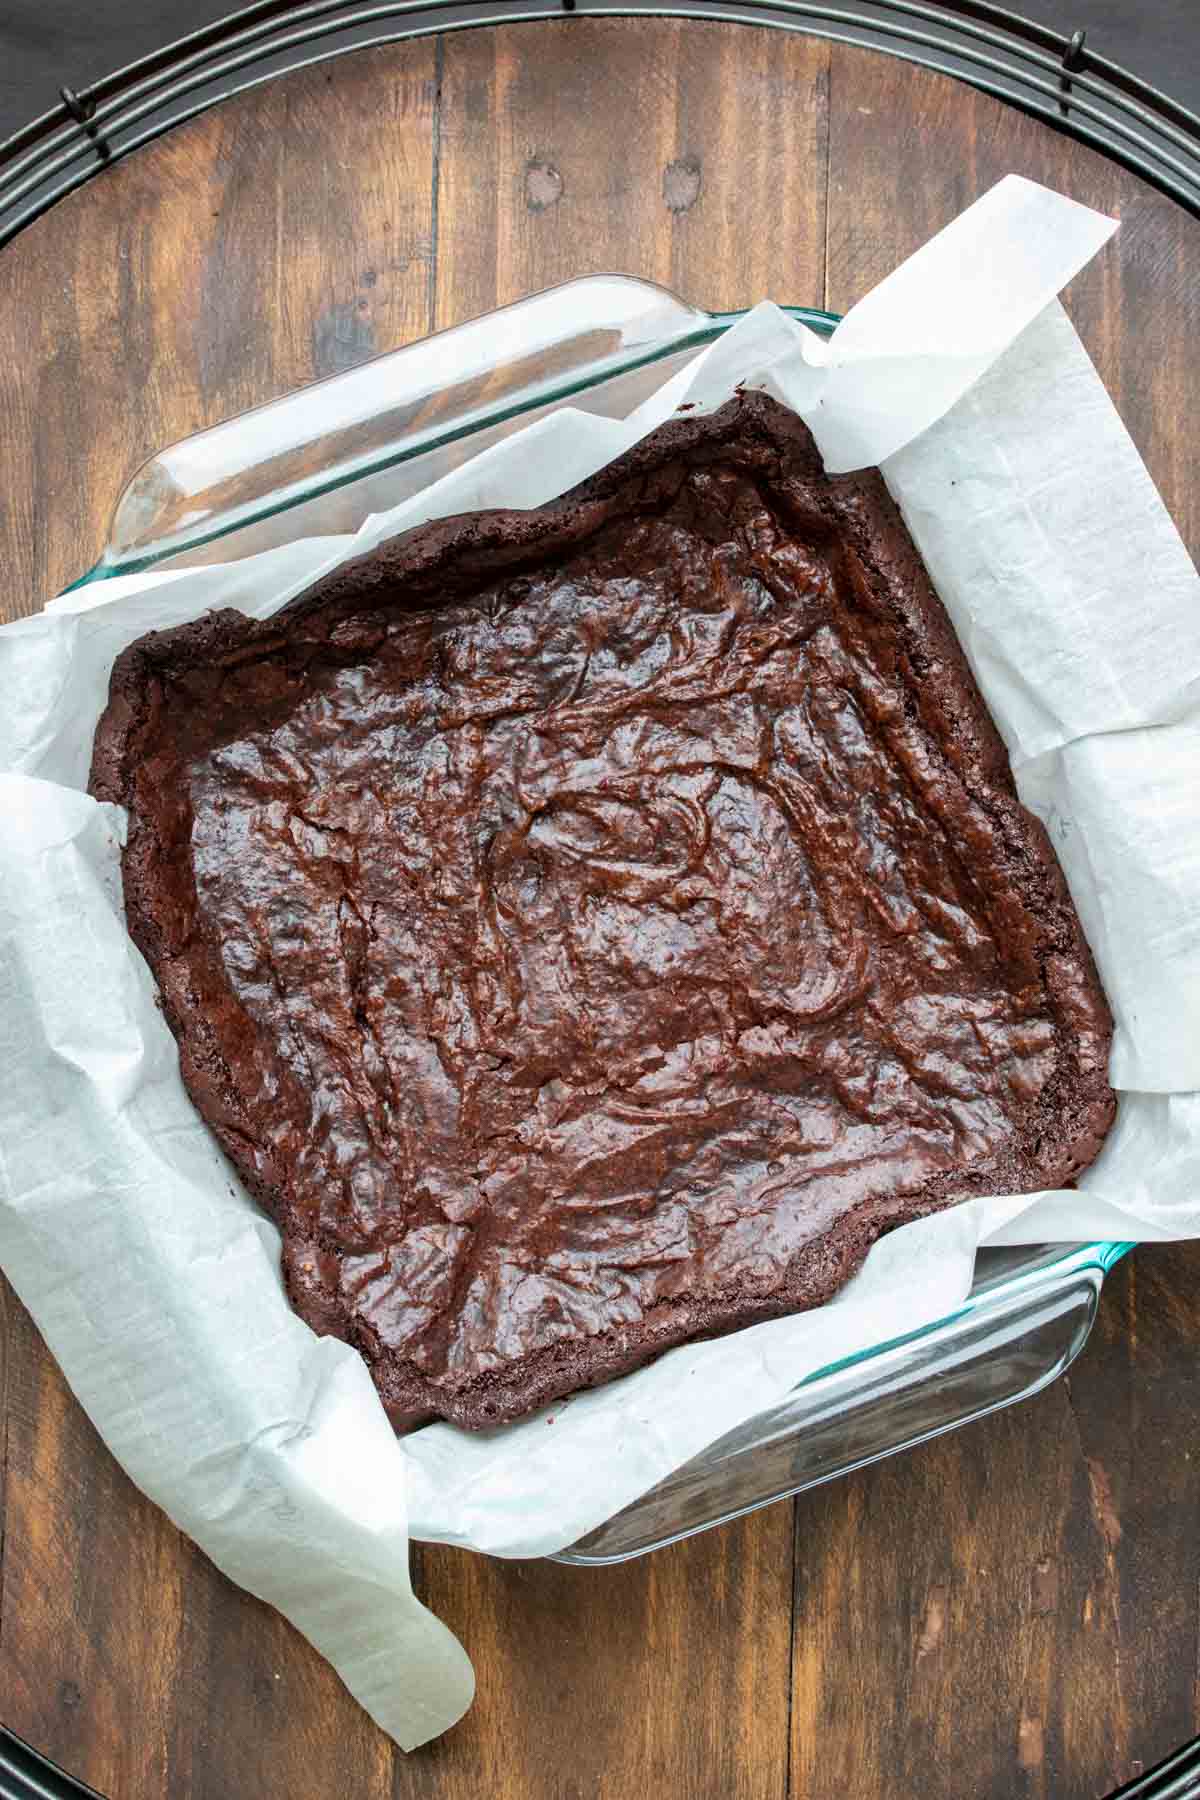 Top view of baked brownies in a square baking dish with parchment